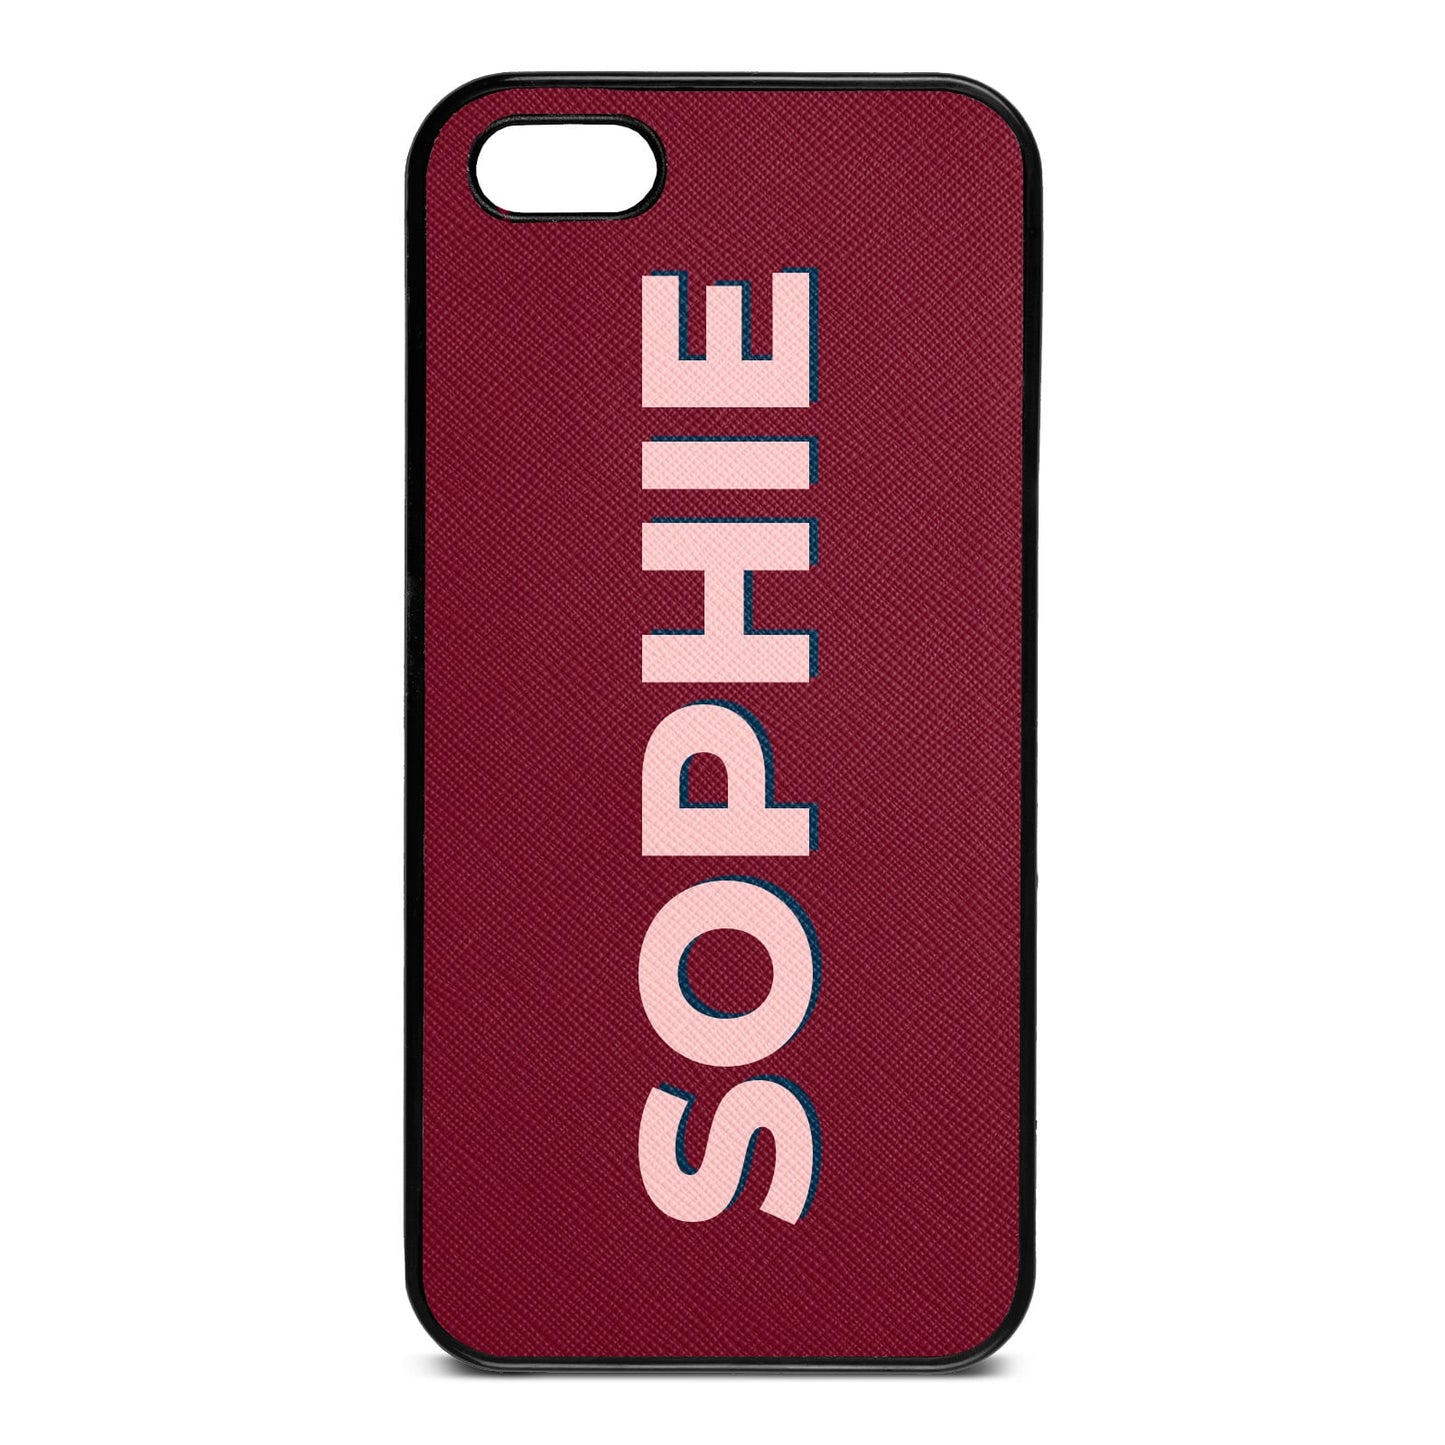 Personalised Dark Red Saffiano Leather iPhone 5 Case